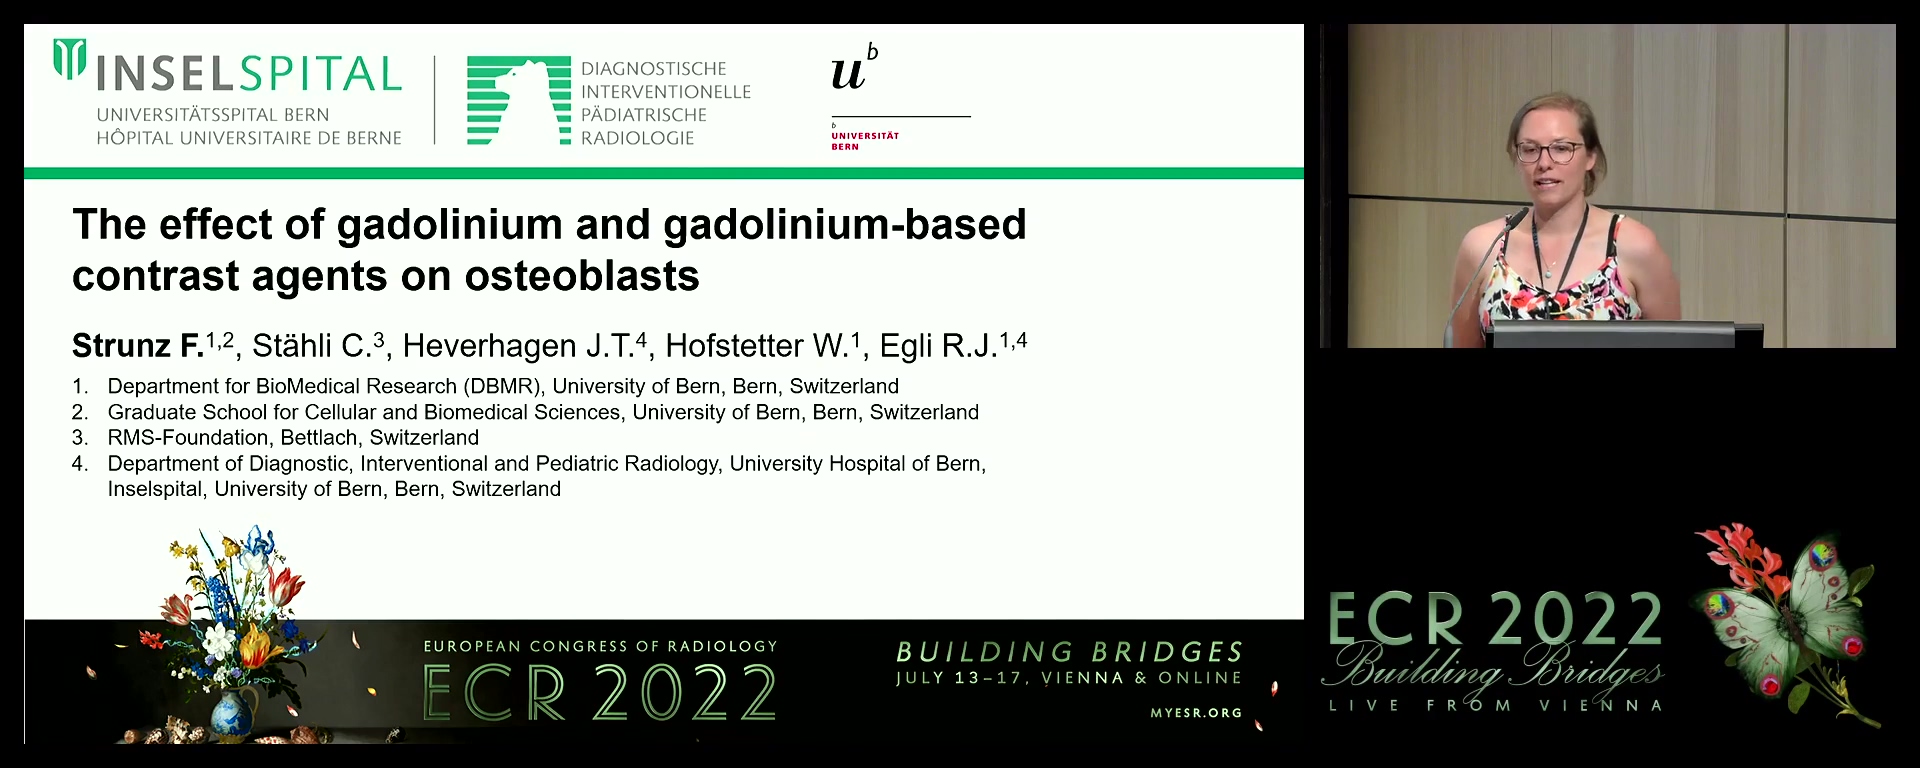 The effect of gadolinium (Gd) and gadolinium-based contrast agents (GBCAs) on osteoblasts